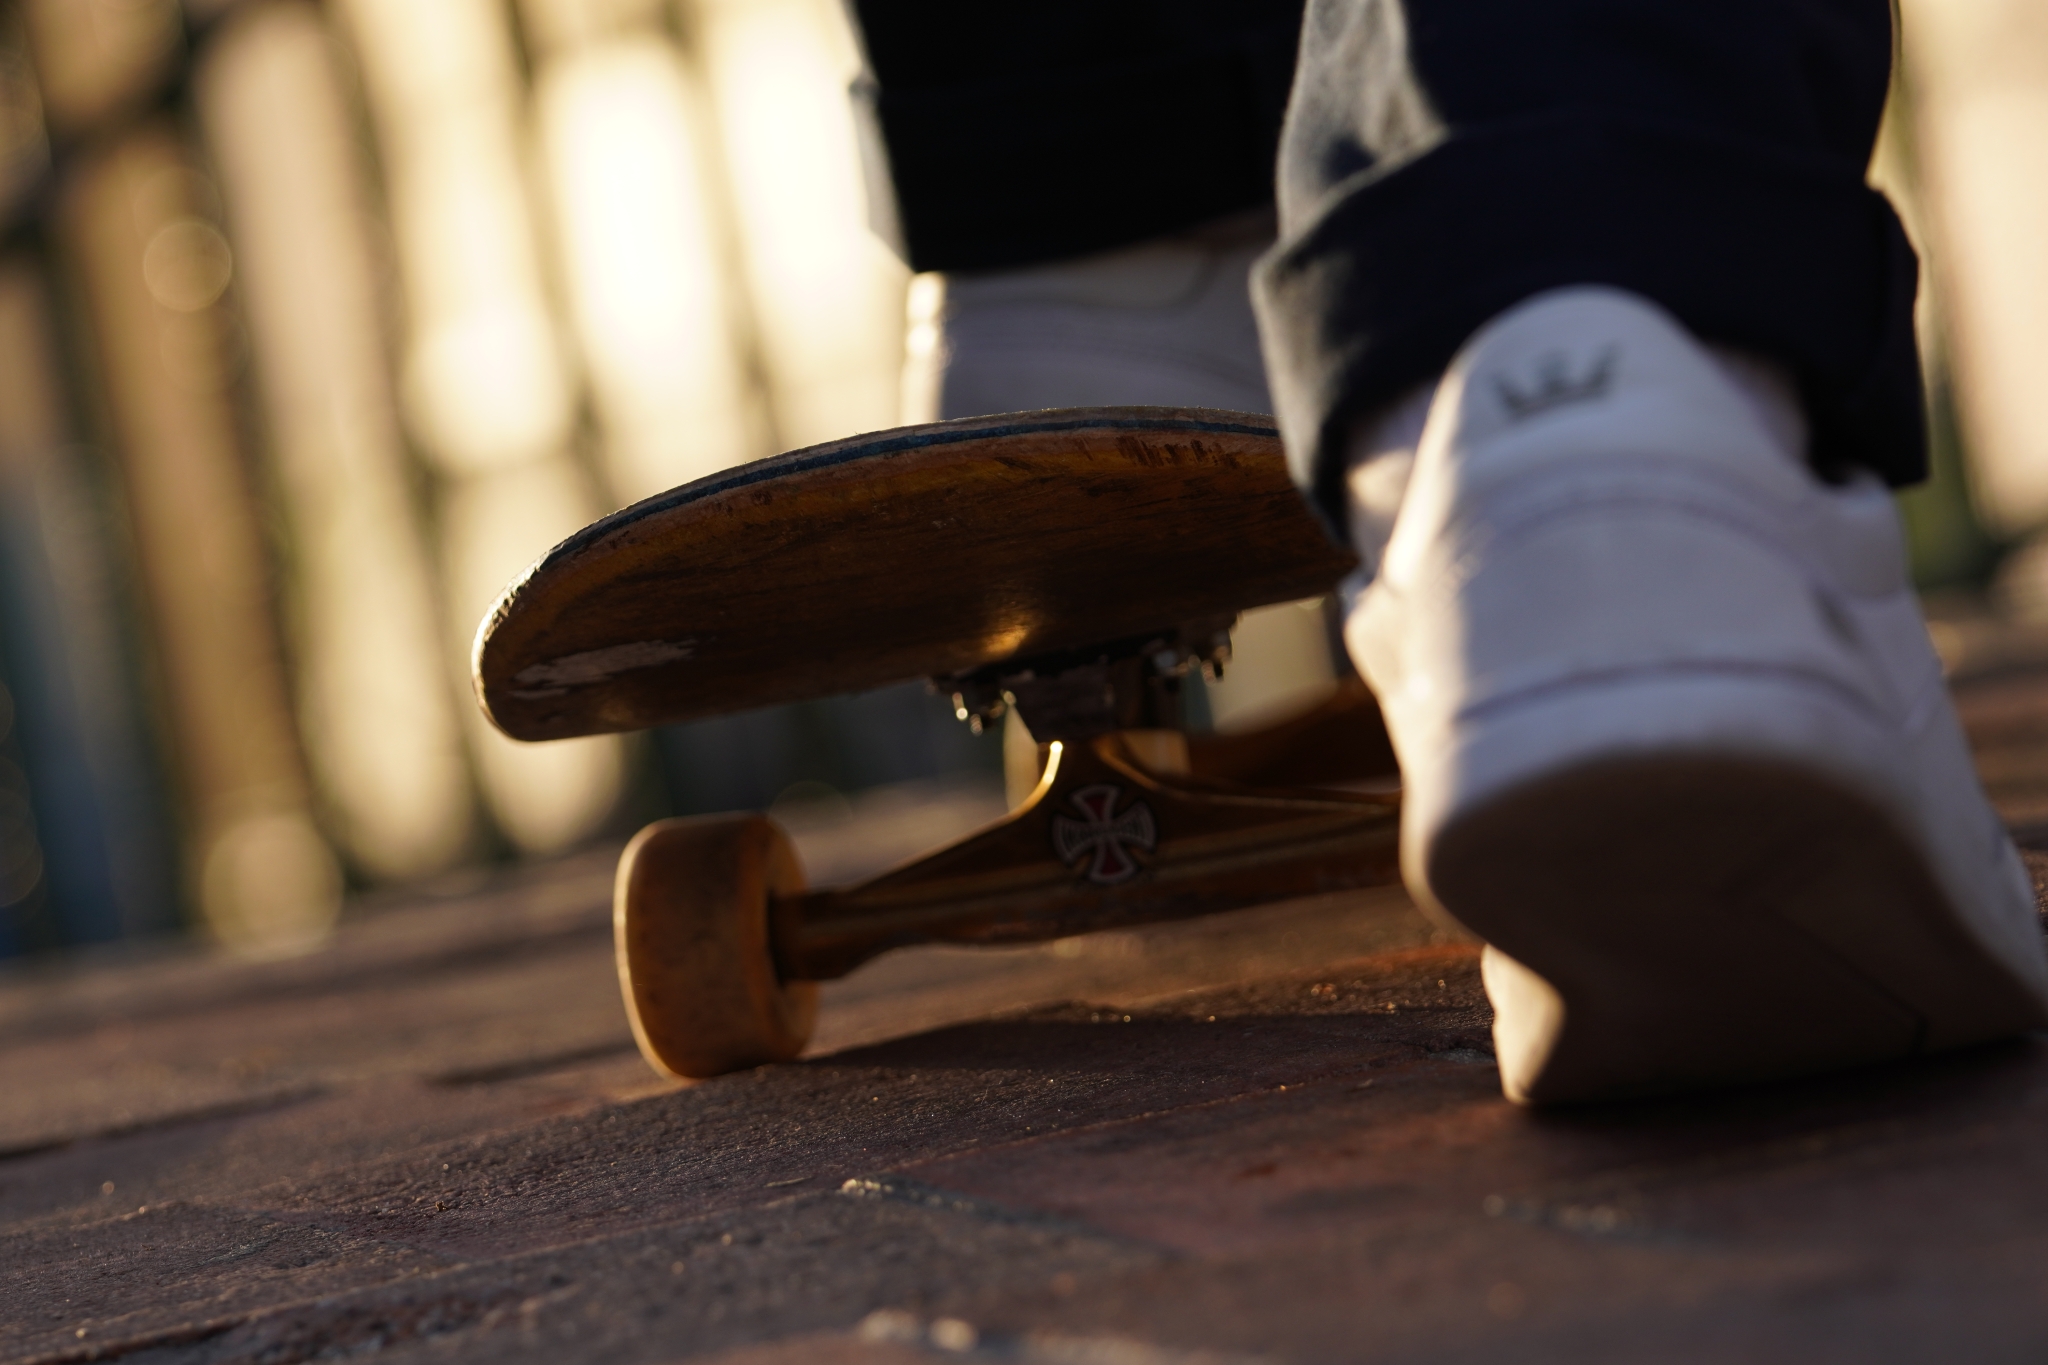 Close-up on of skateboarder's feet, one on the board, one about to push